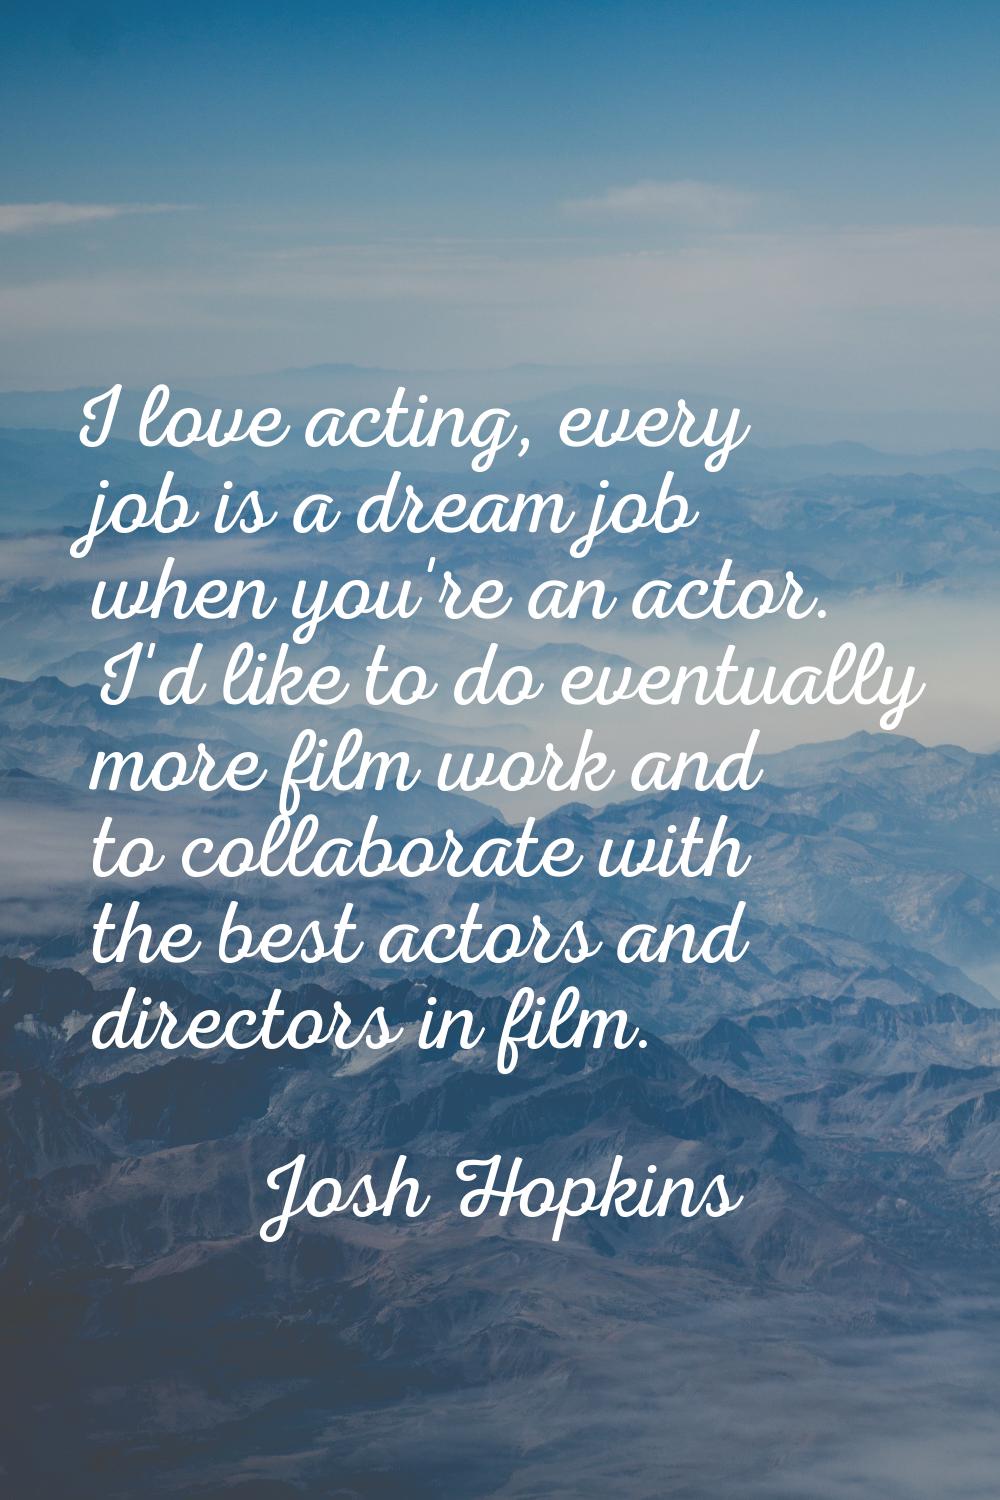 I love acting, every job is a dream job when you're an actor. I'd like to do eventually more film w